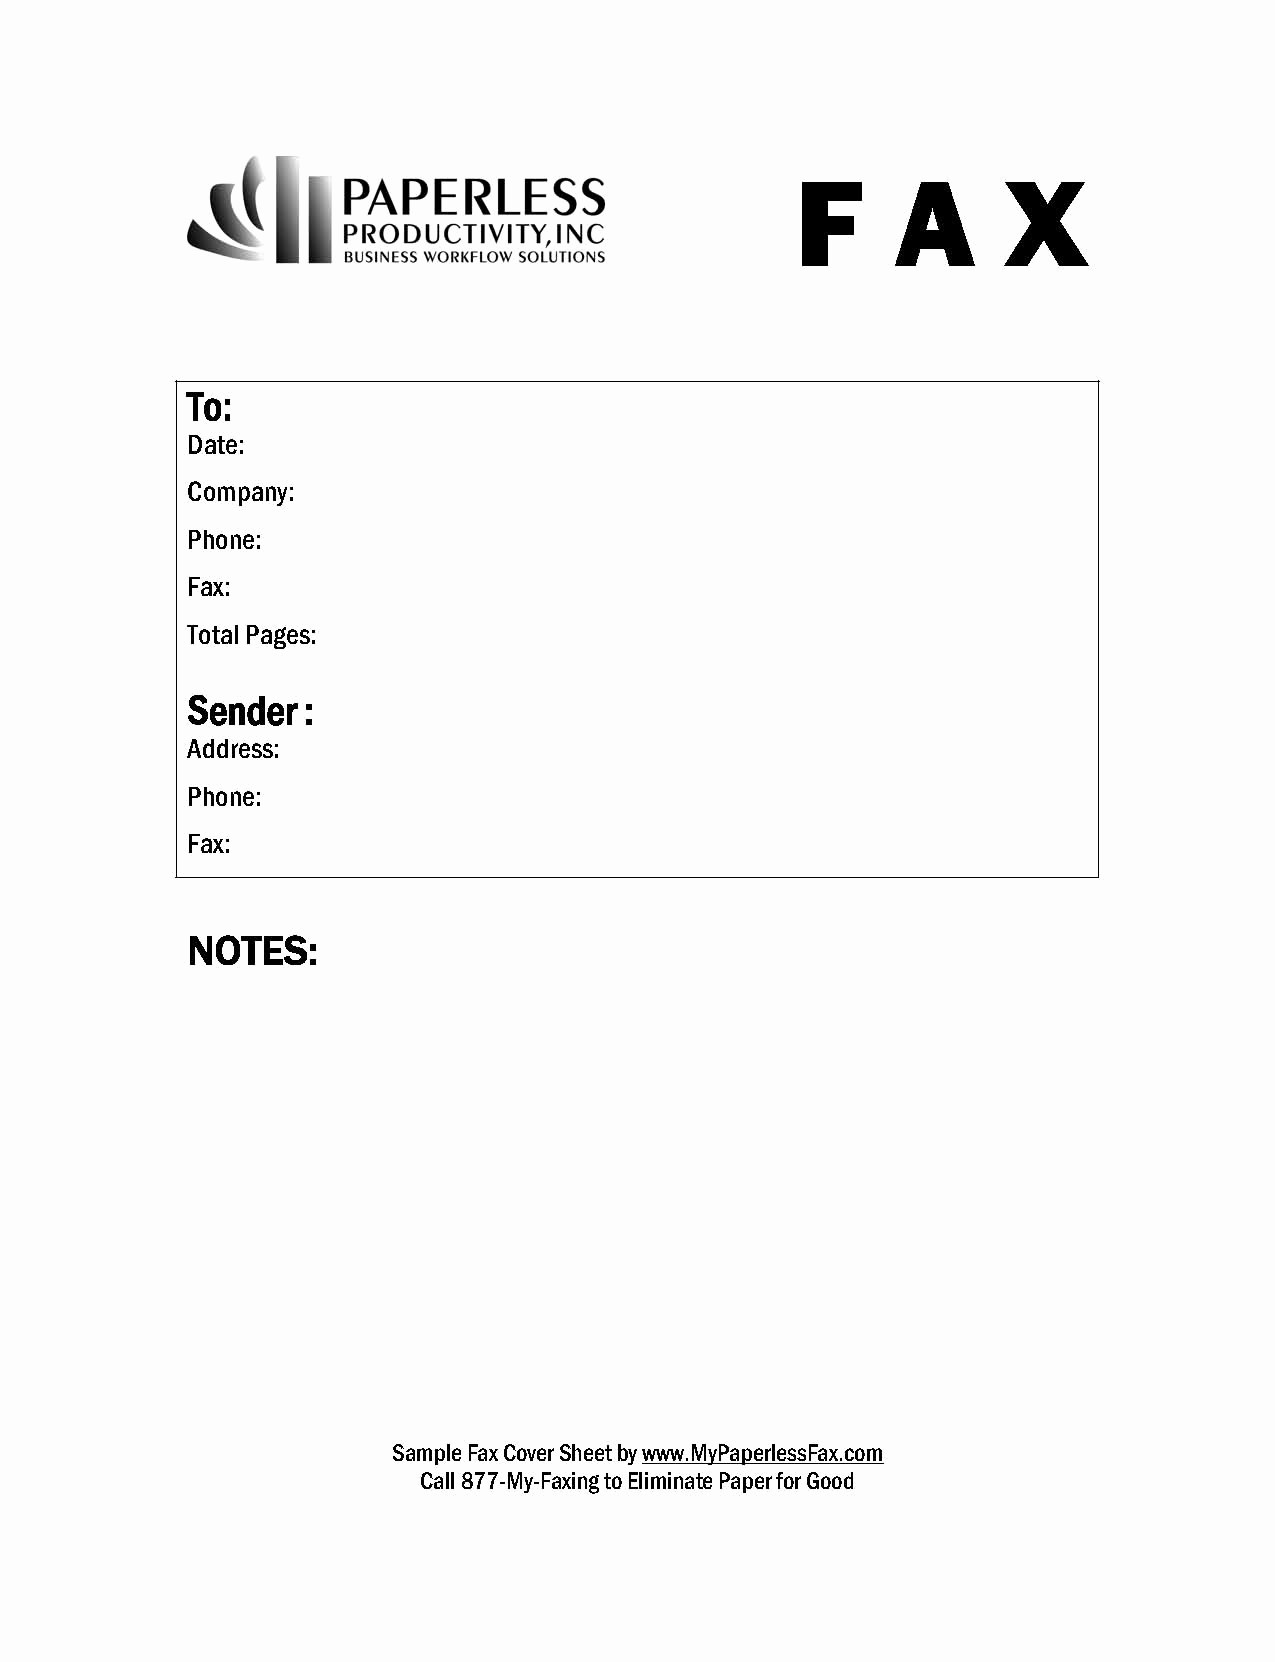 Sample Of Fax Cover Sheet Awesome Blank Fax Cover Letter 2016 Samplebusinessresume